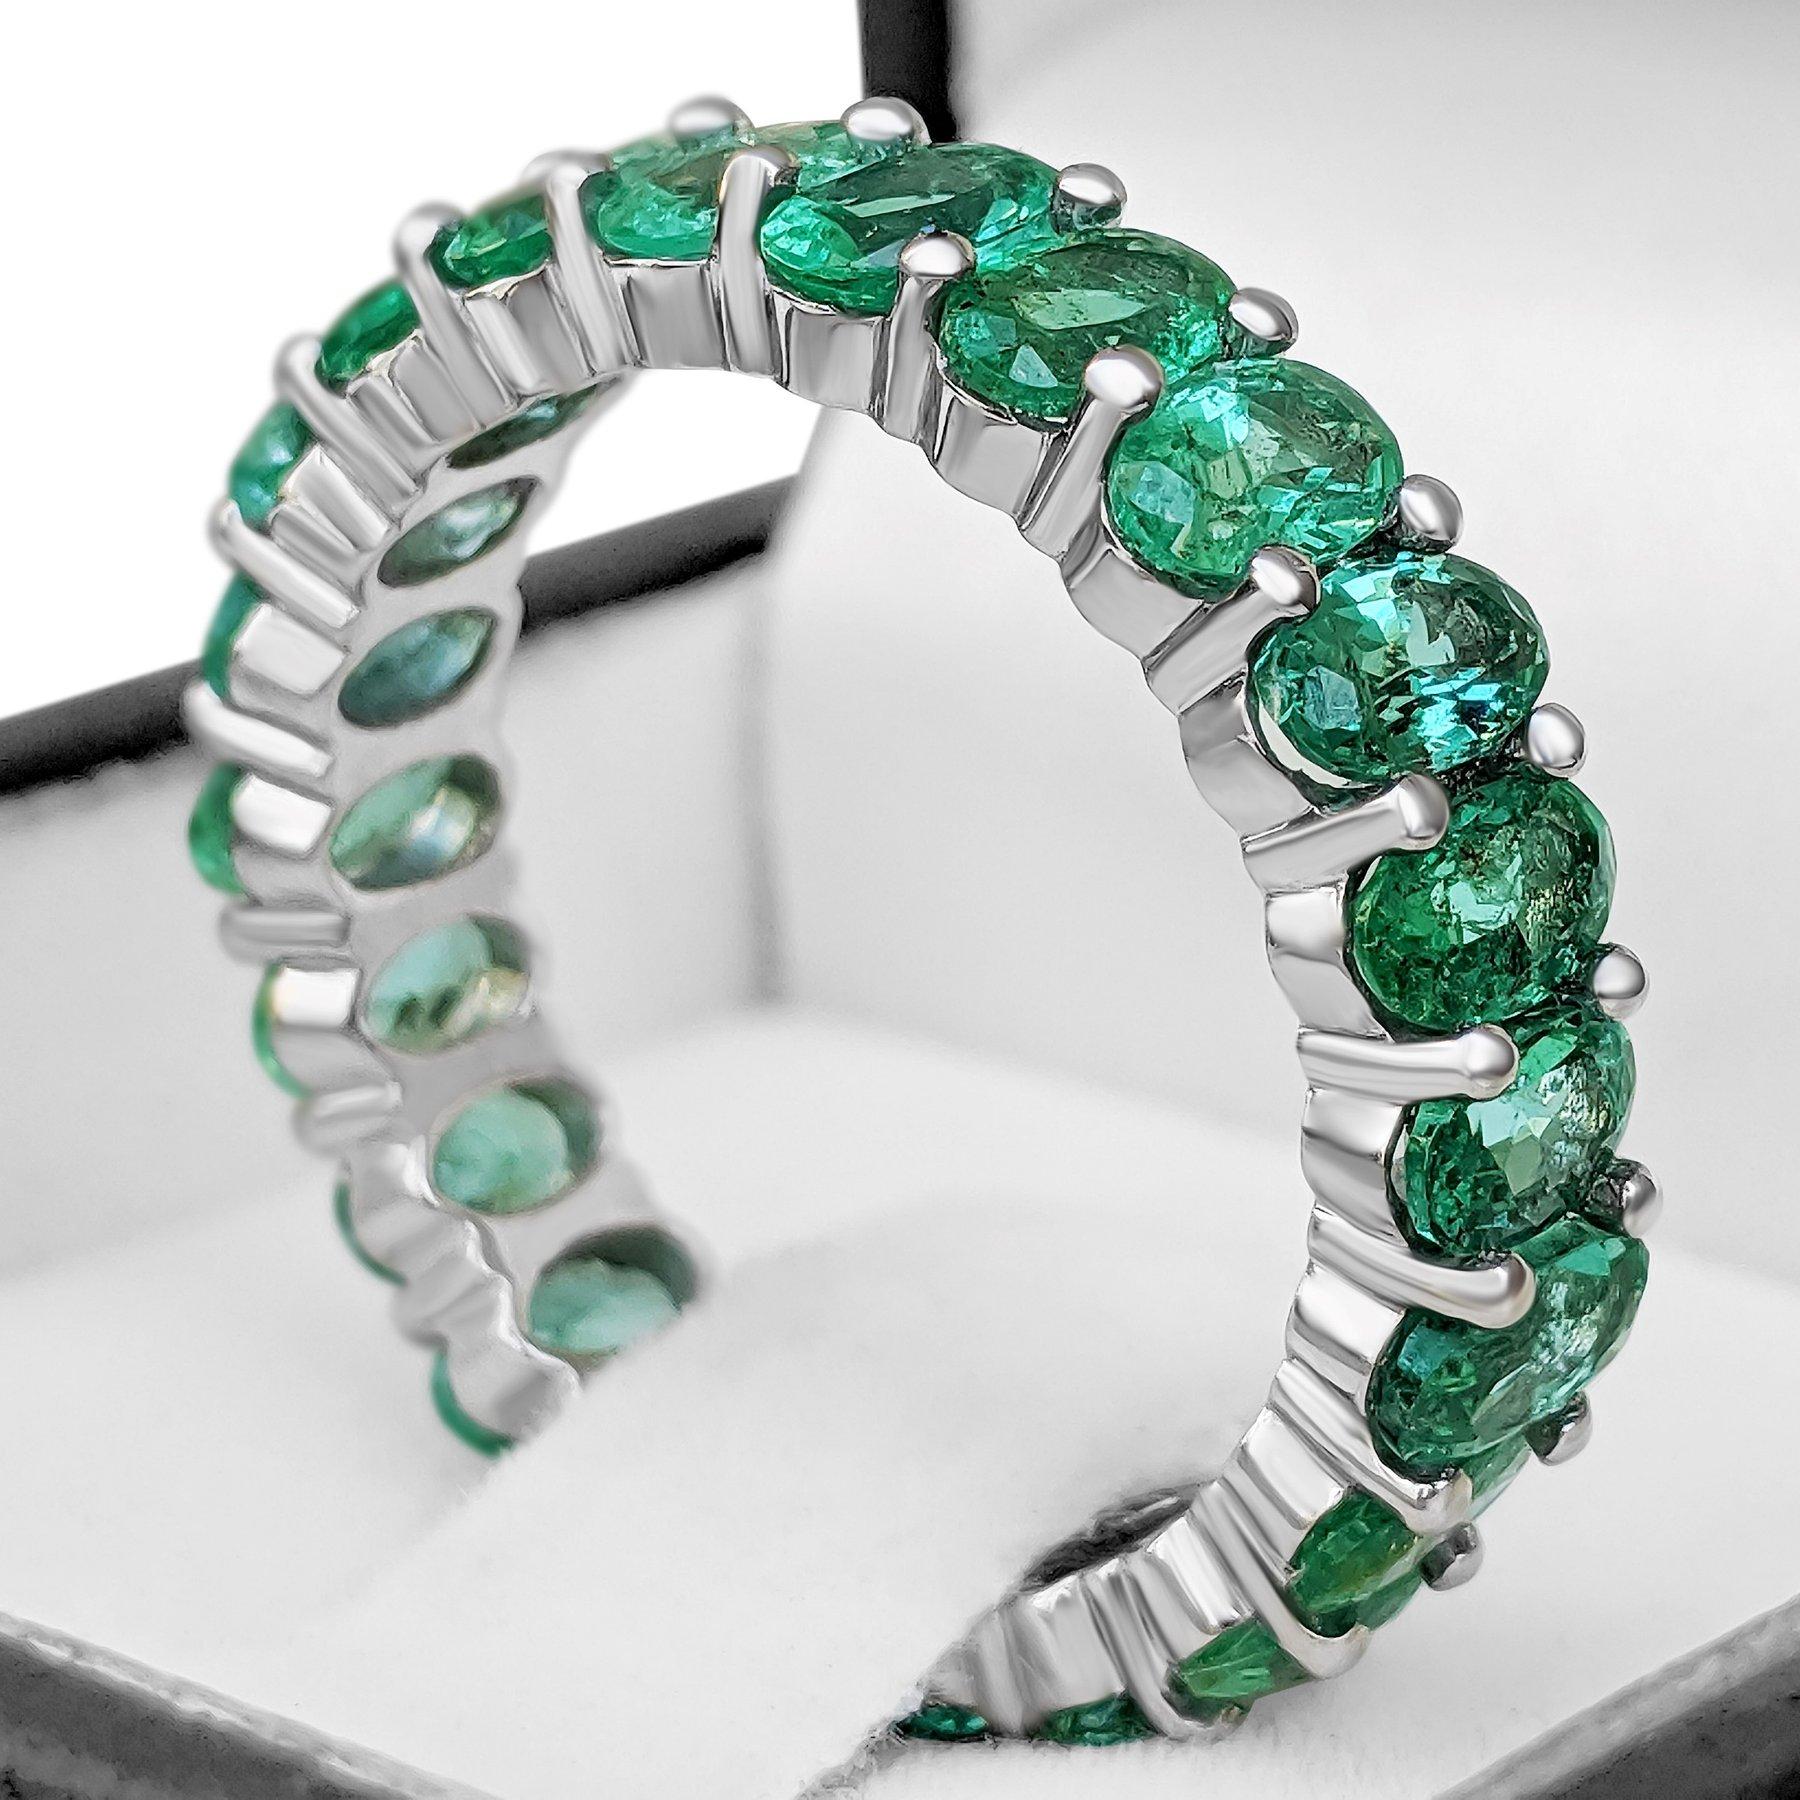 Women's $1 NO RESERVE! 5.73 cttw Natural Emeralds Eternity Band - 14k White Gold